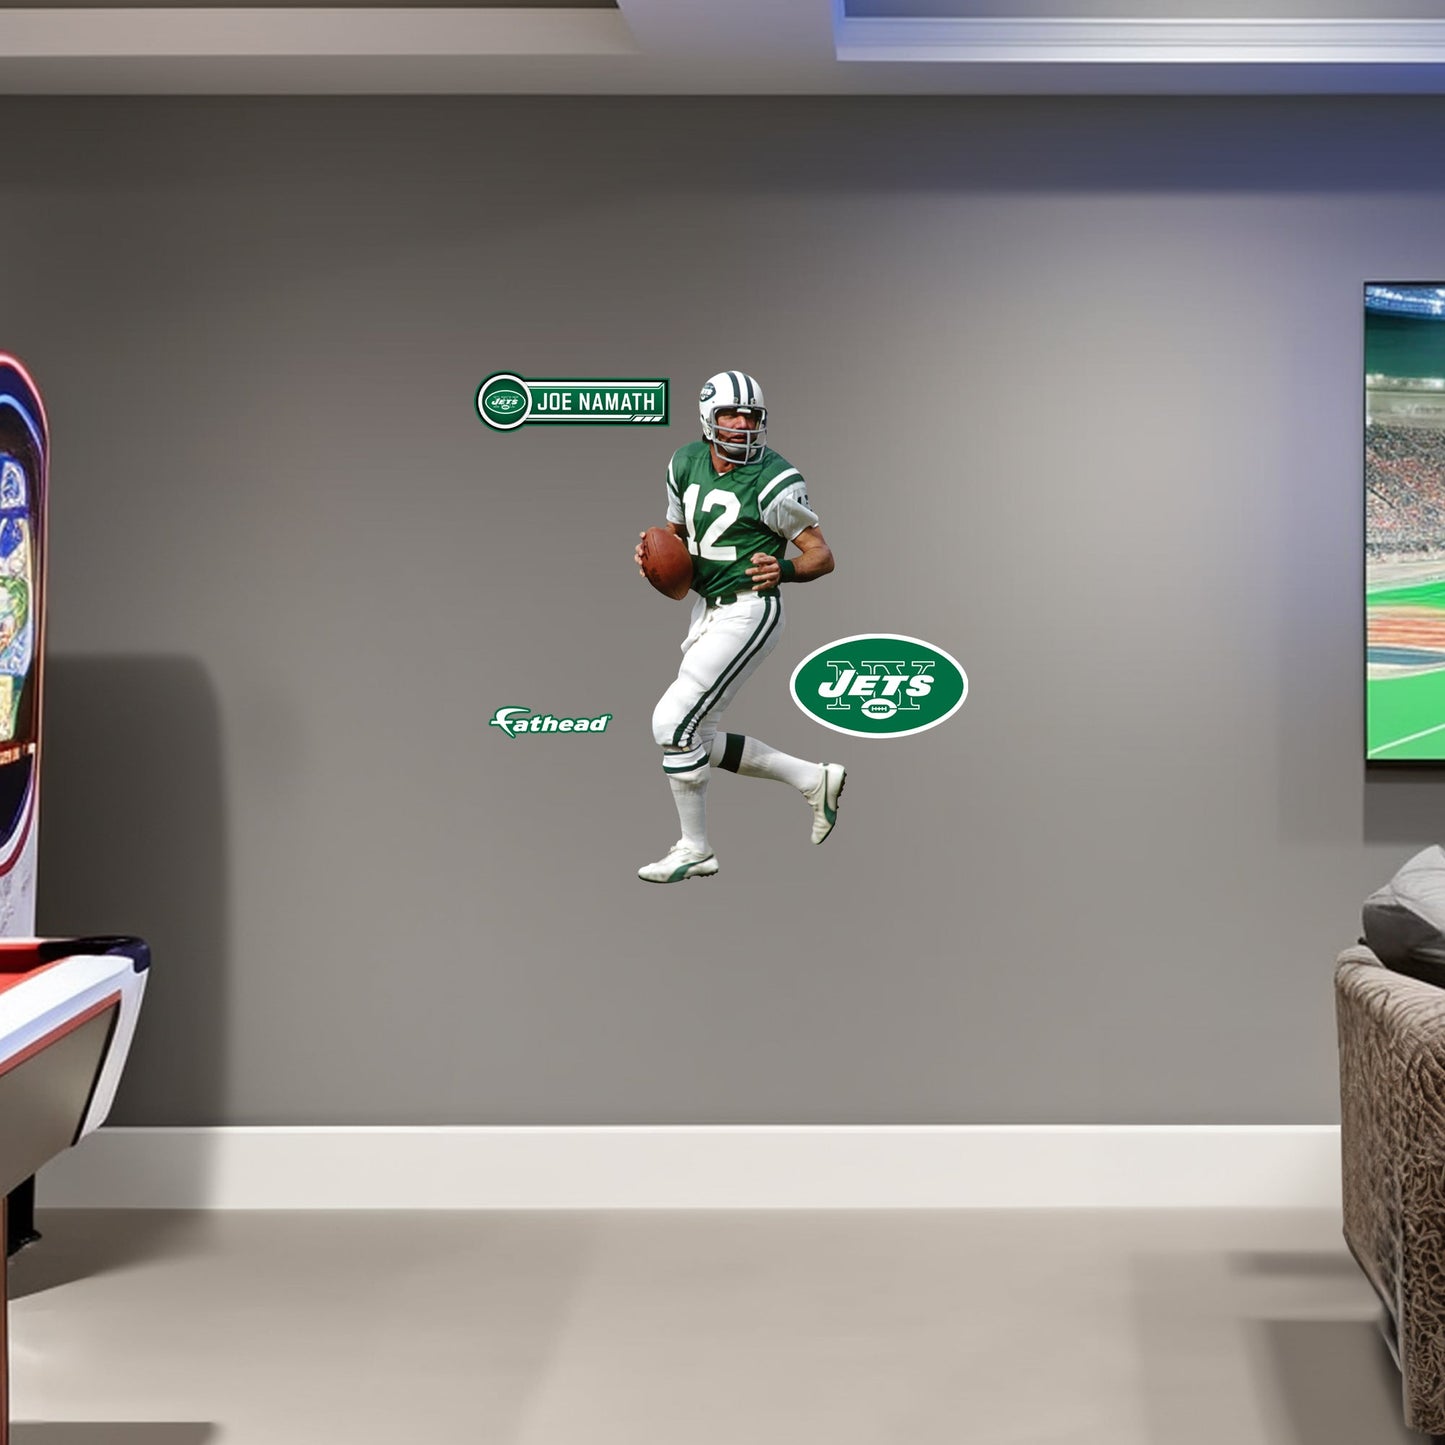 New York Jets: Joe Namath Legend        - Officially Licensed NFL Removable     Adhesive Decal